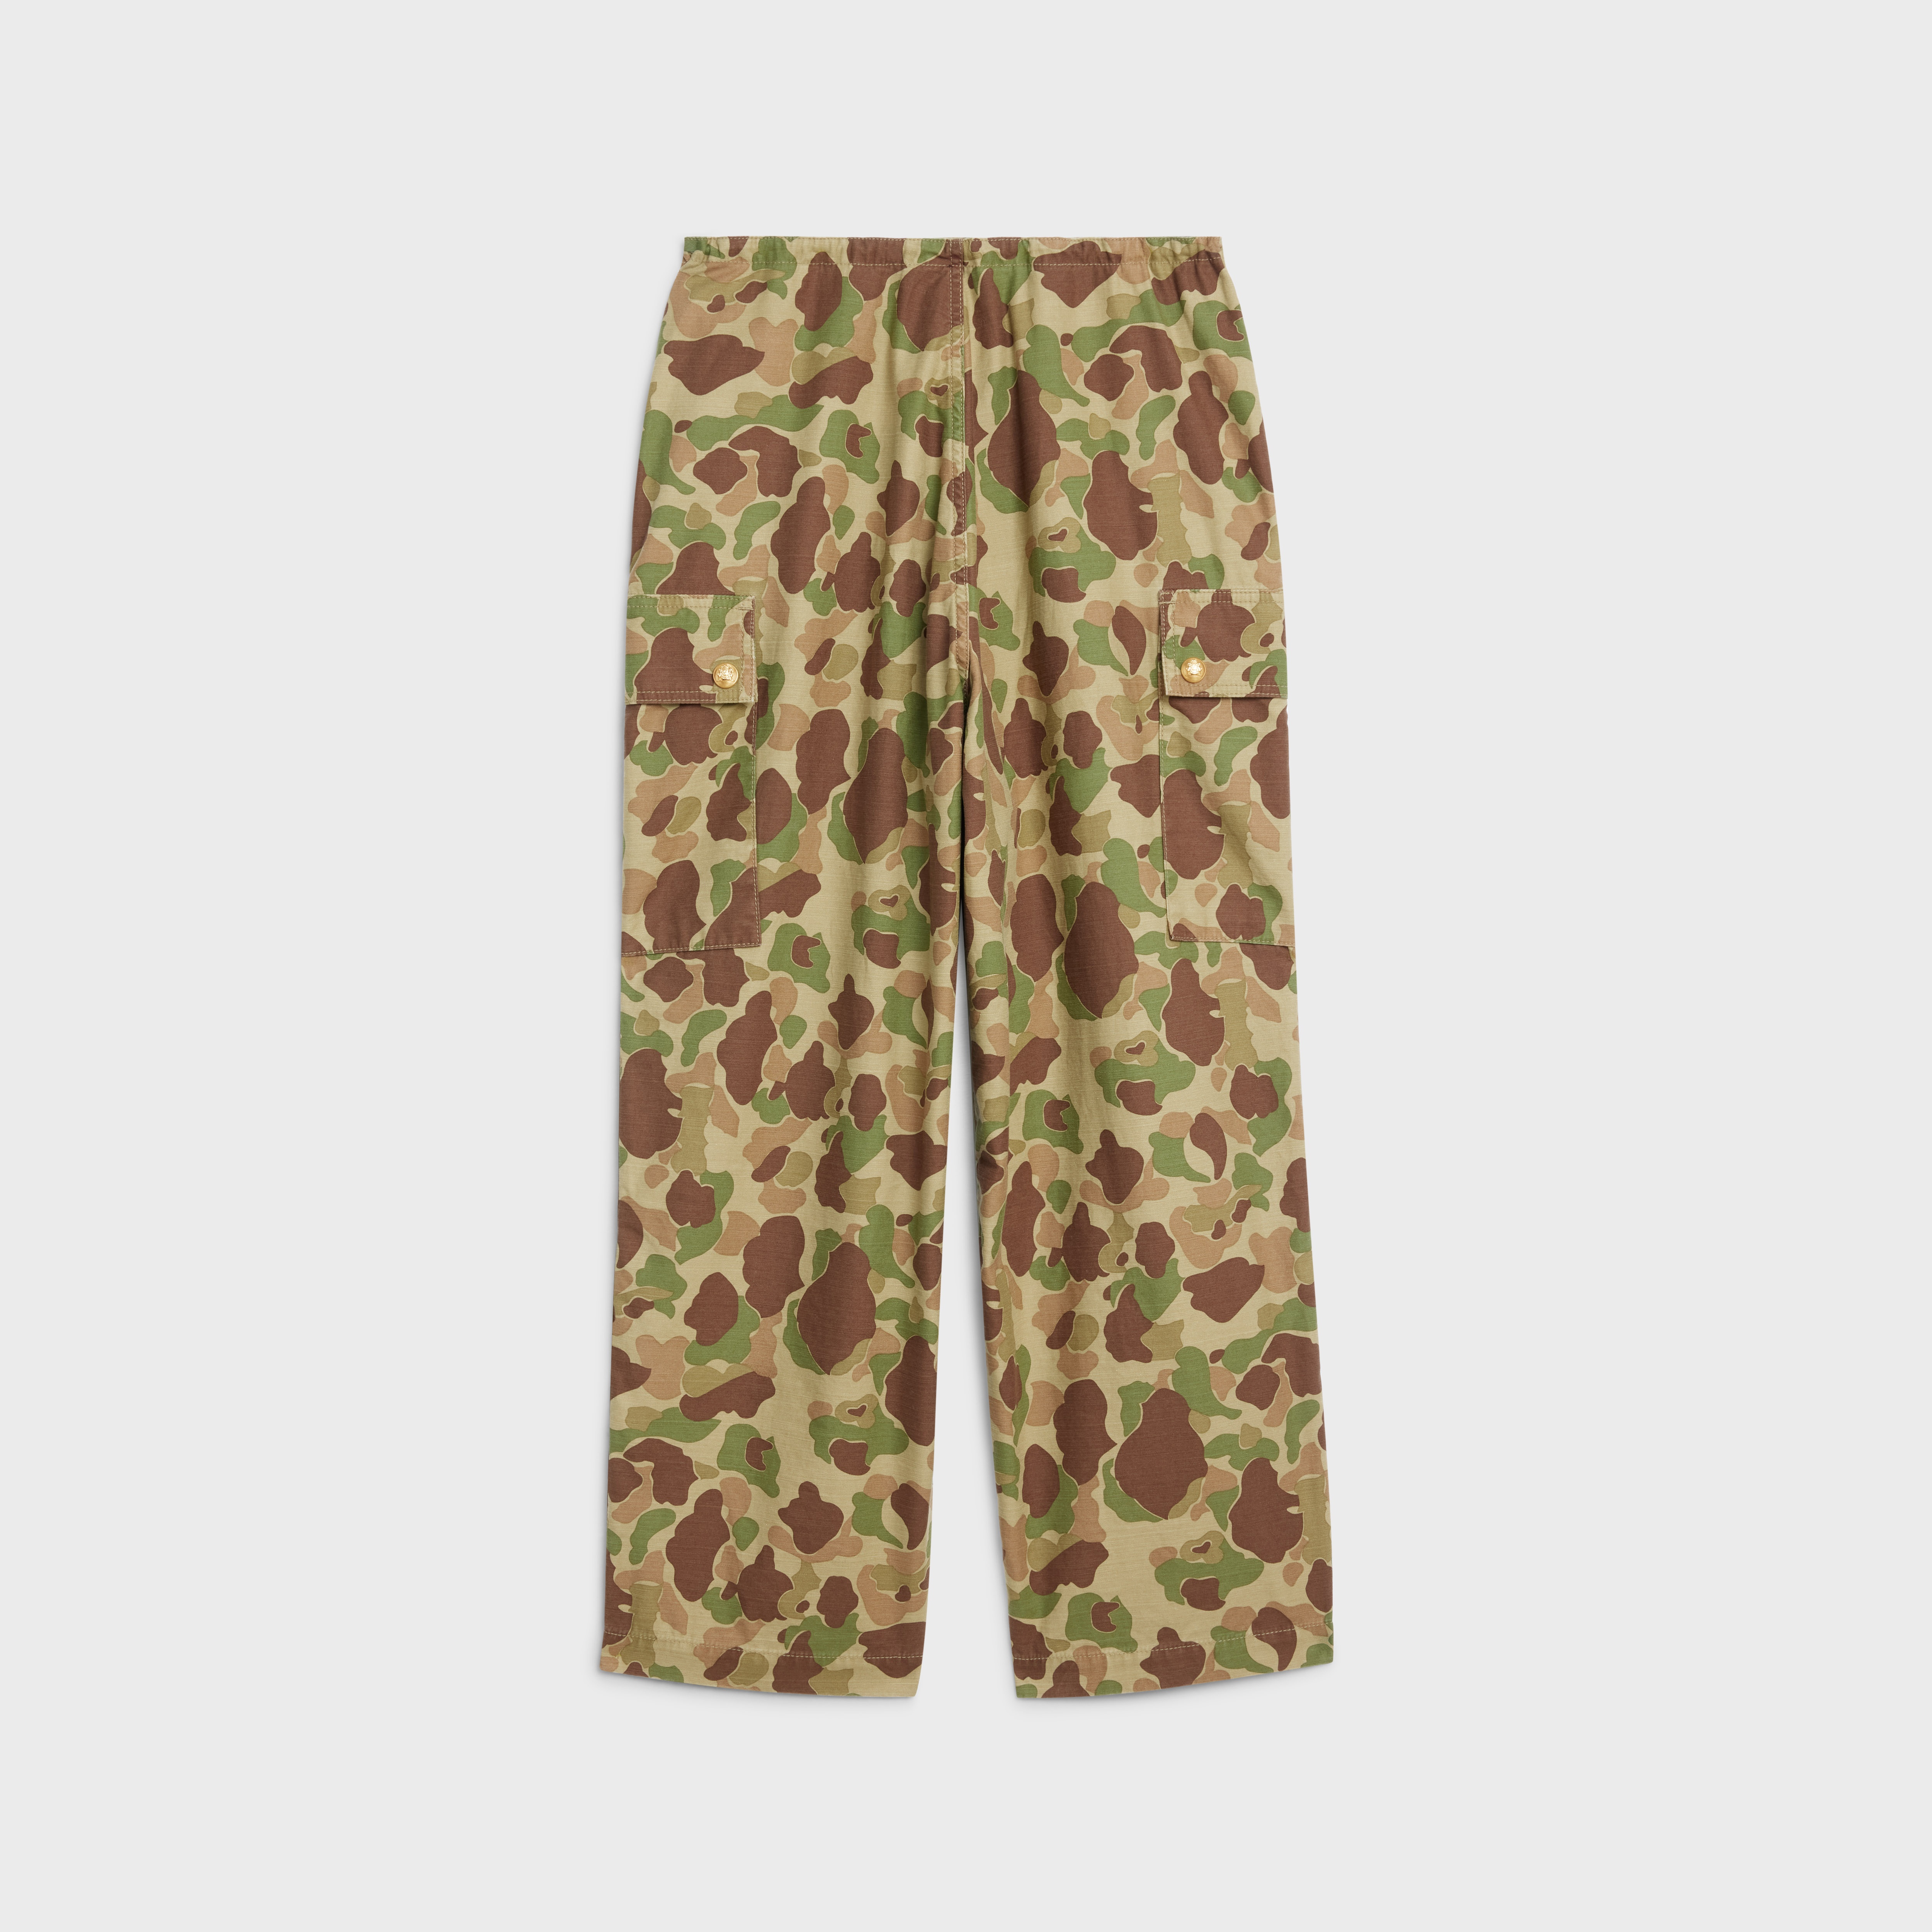 CARGO PANTS IN CAMOUFLAGE COTTON - 2